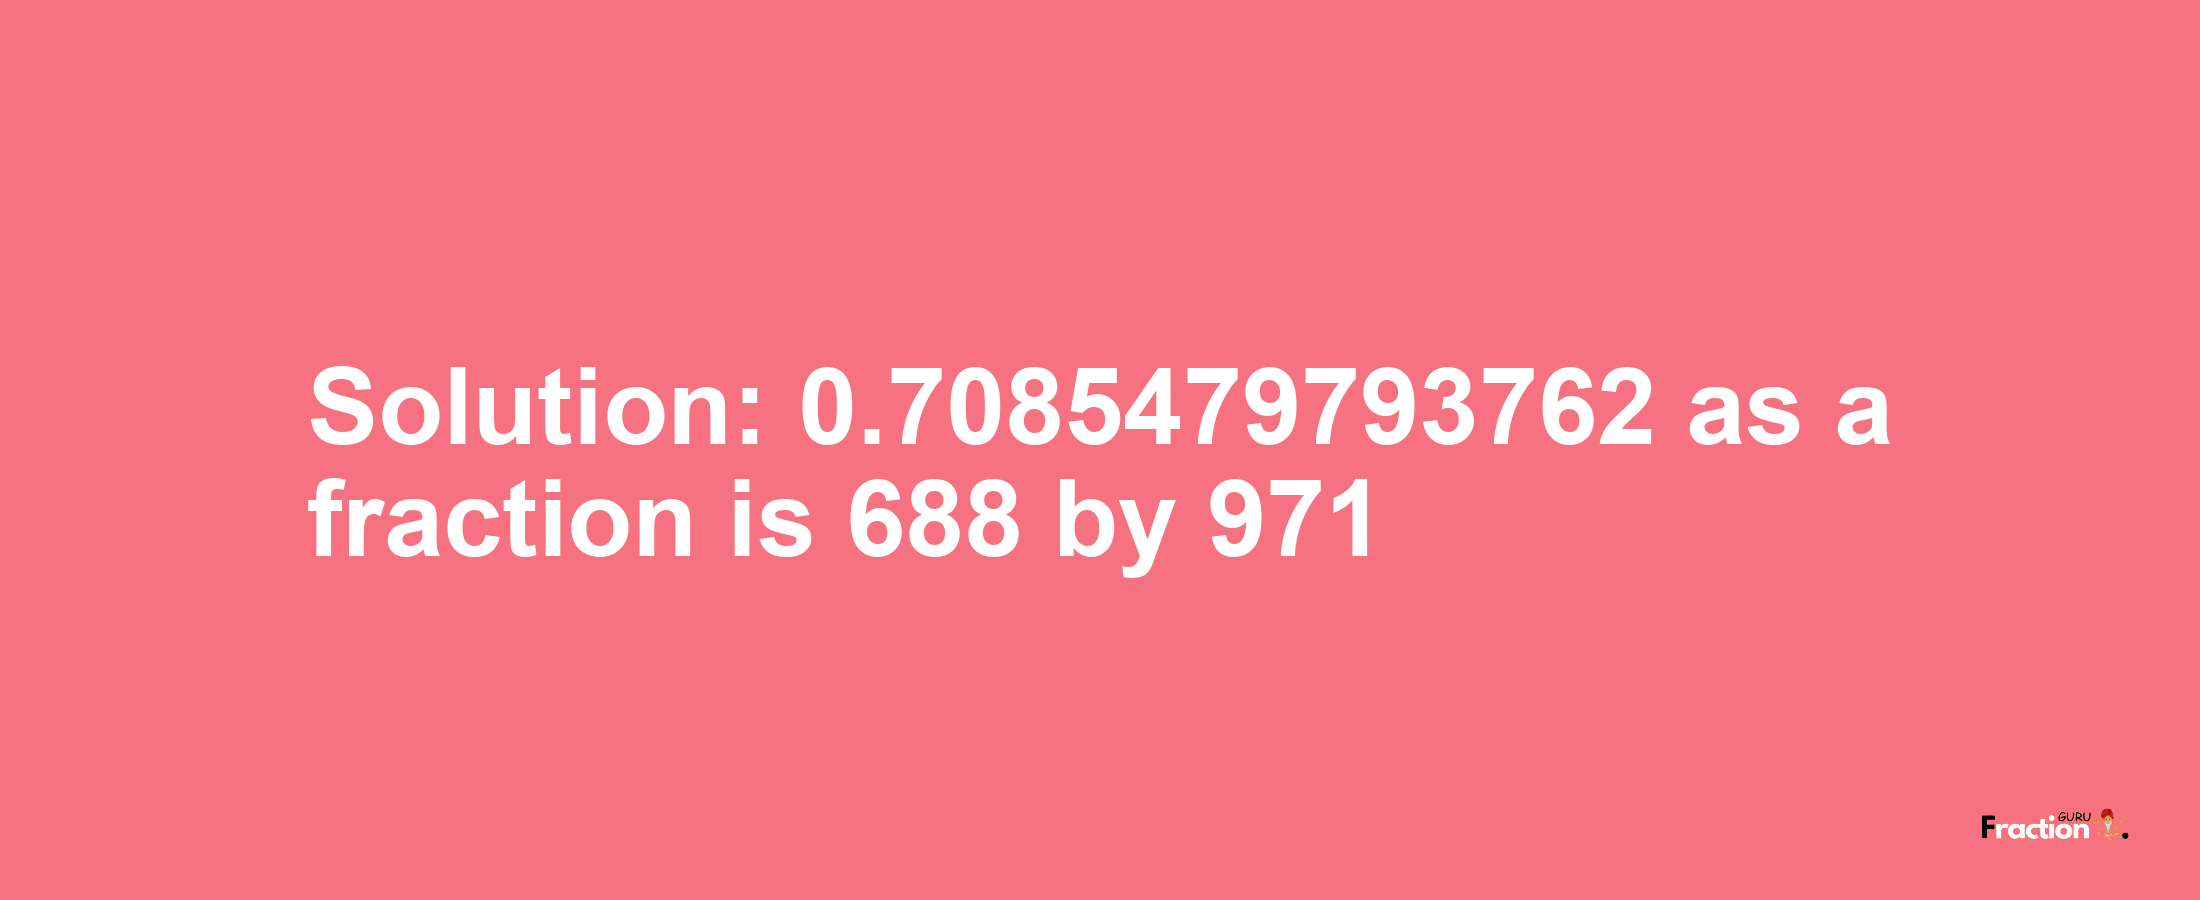 Solution:0.7085479793762 as a fraction is 688/971